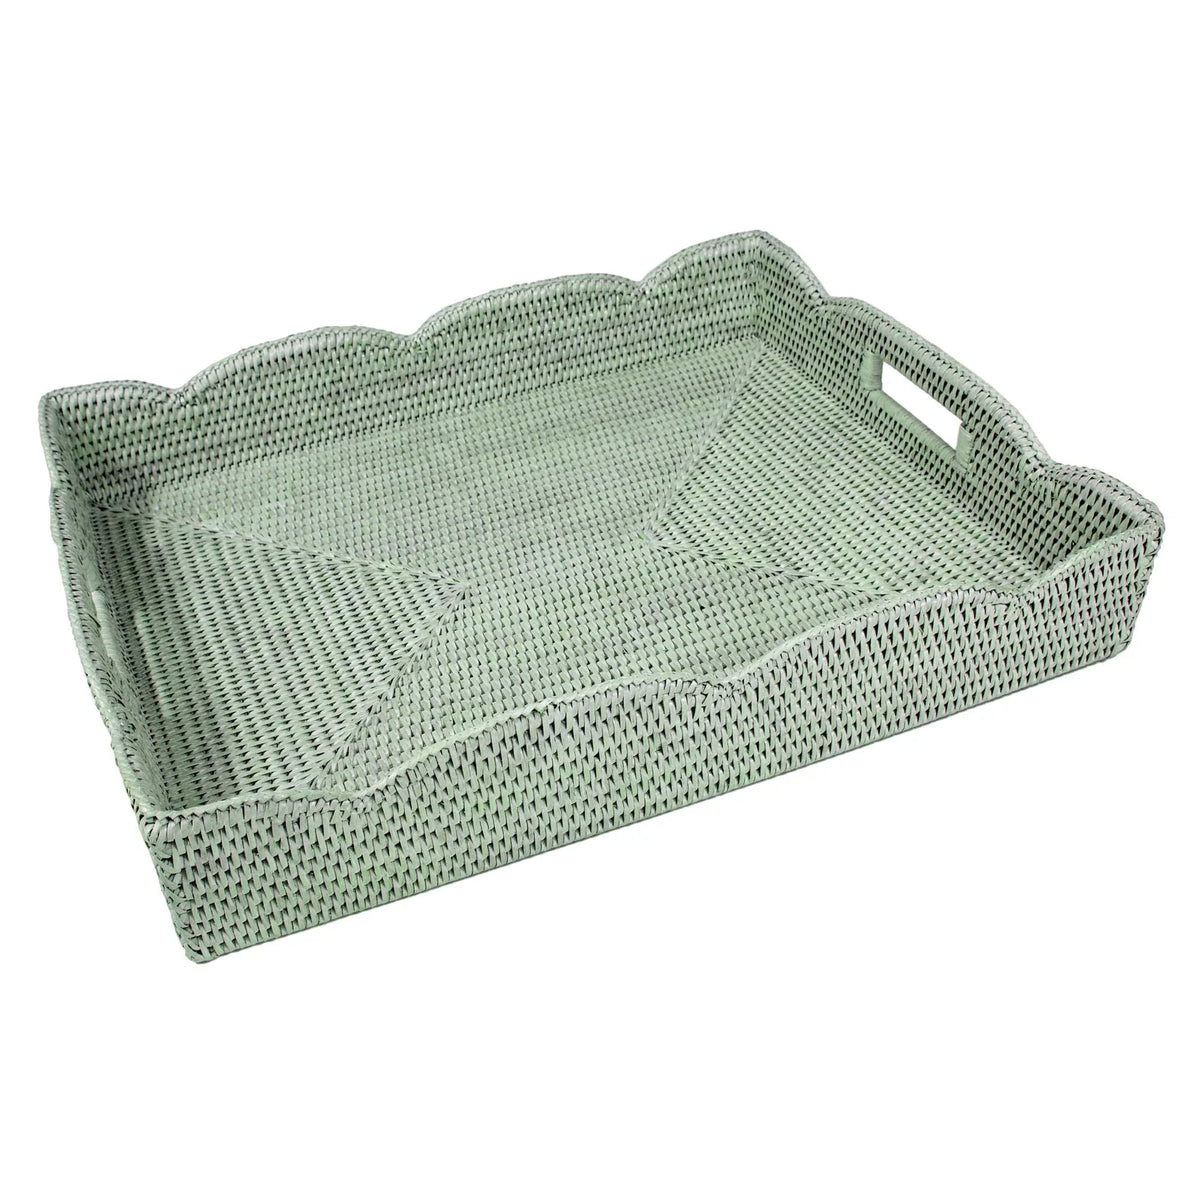 Rattan Scalloped Large Tray in Green